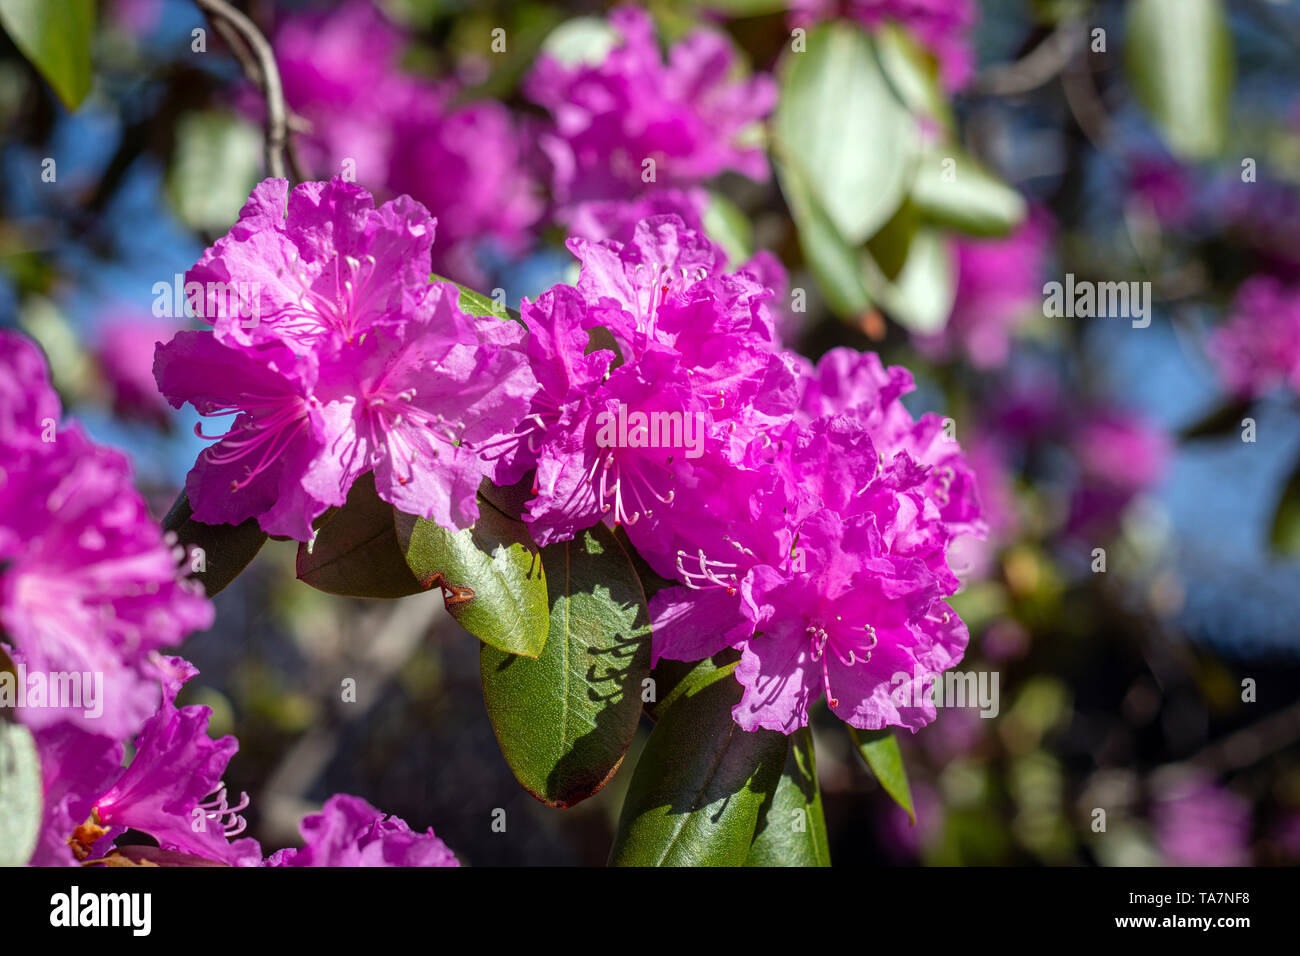 Rhododendron trees woody plants in the heath family closeup at spring full bloom Stock Photo